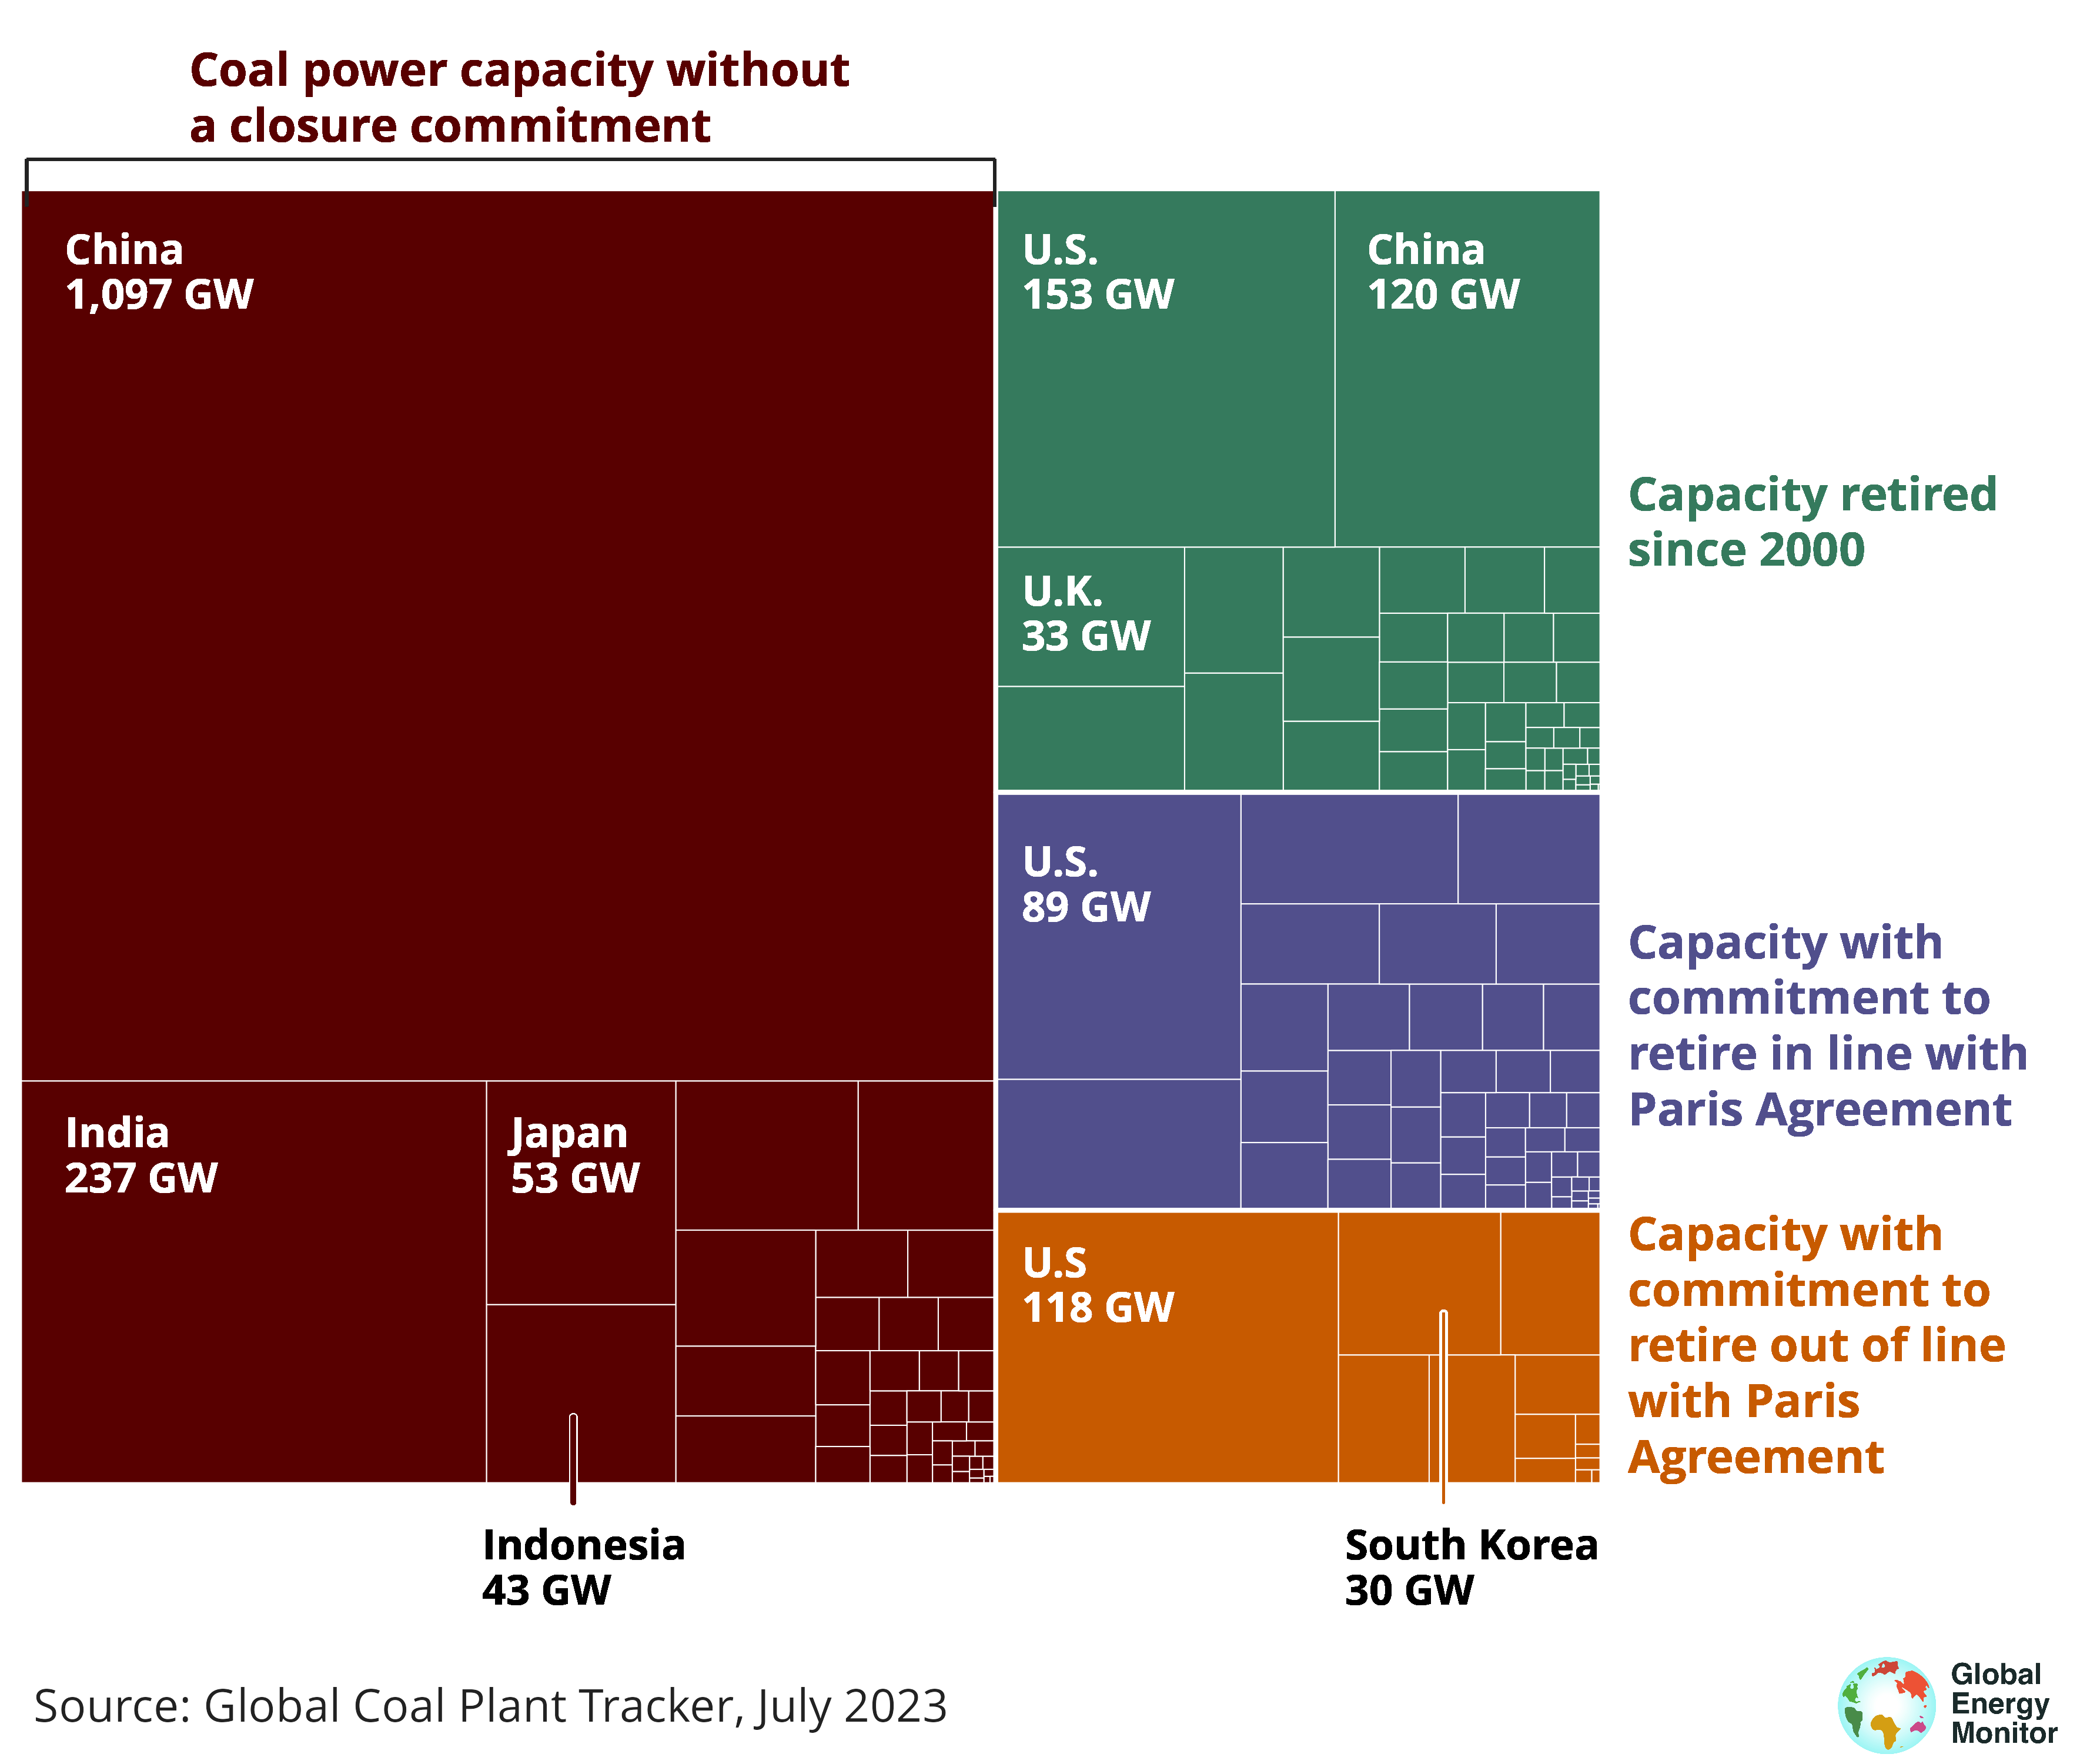 Treemap chart showing the different phaseout status of coal power globally, highlighting how China (1,097 gigawatts) and India (237 gigawatts) have the most coal capacity without a closure commitment, the US (153 gigawatts) and China (120 gigawatts) having retired most capacity since 2000. The US has 89 gigawatts of capacity with commitment to retire in line with the Paris agreement and 118 gigawatts with a commitment to retire out of line with Paris Agreement goals. 